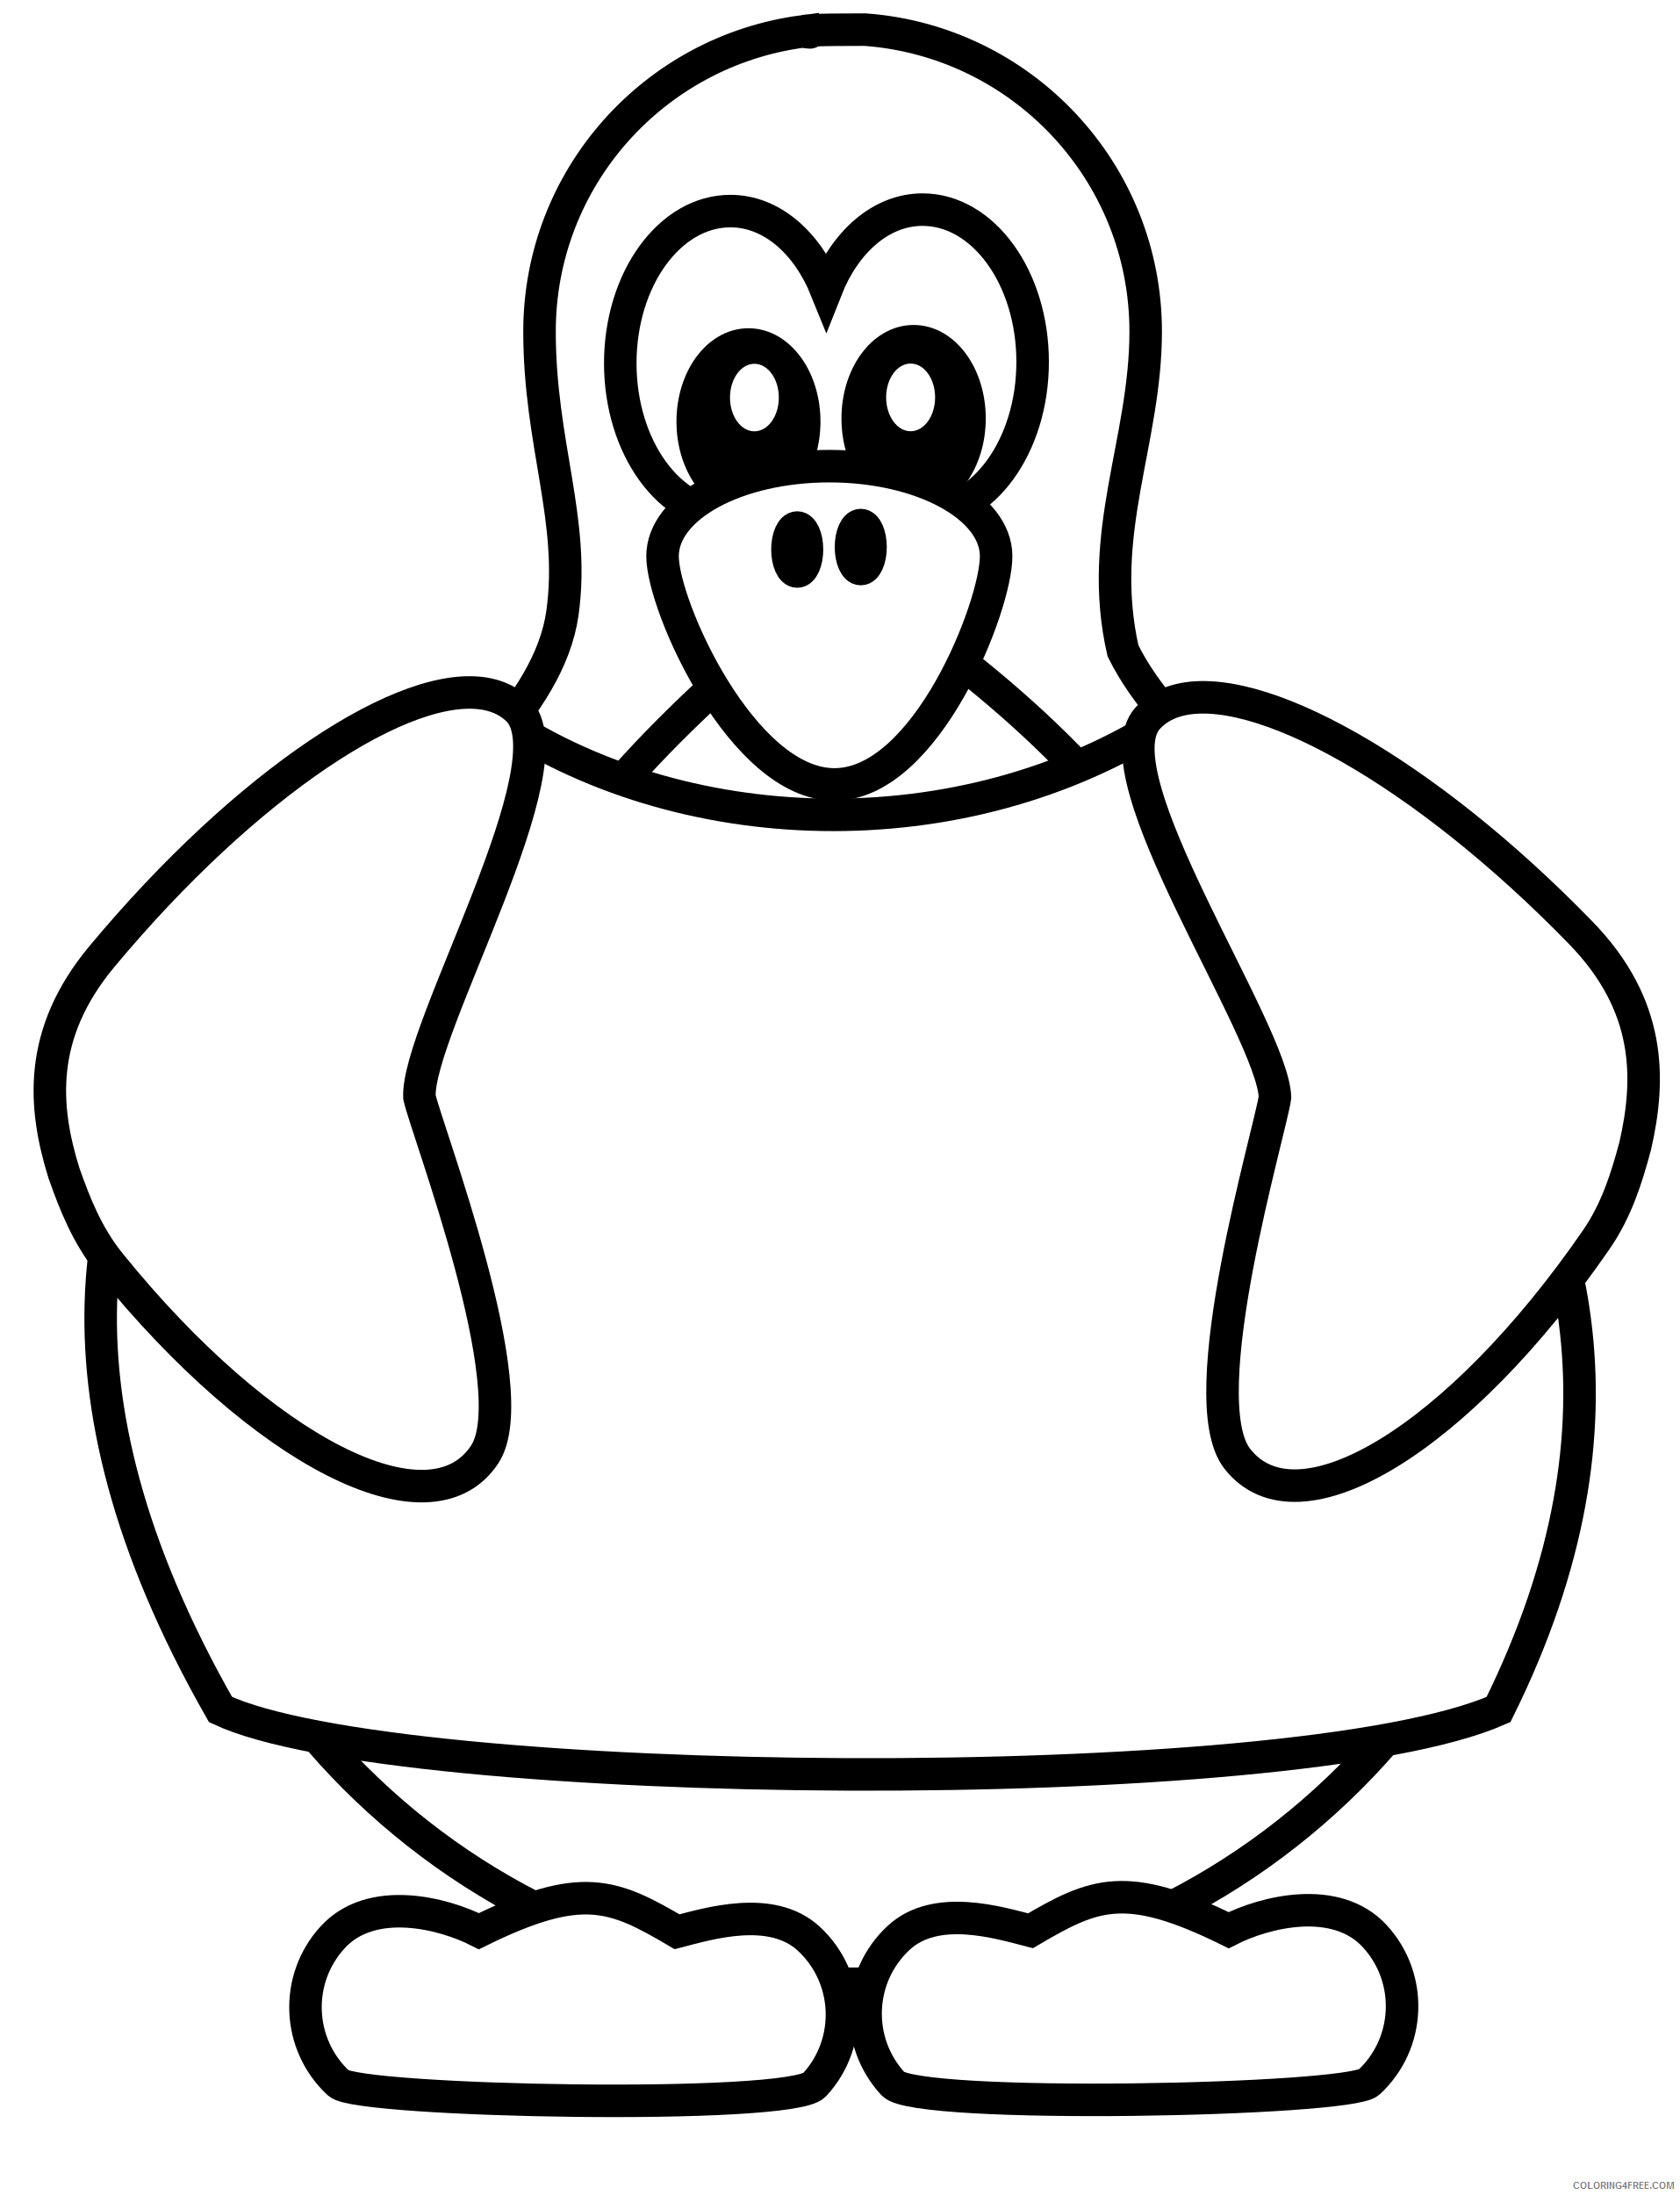 Penguin Outline Coloring Pages peterm penguin with a shirt Printable Coloring4free